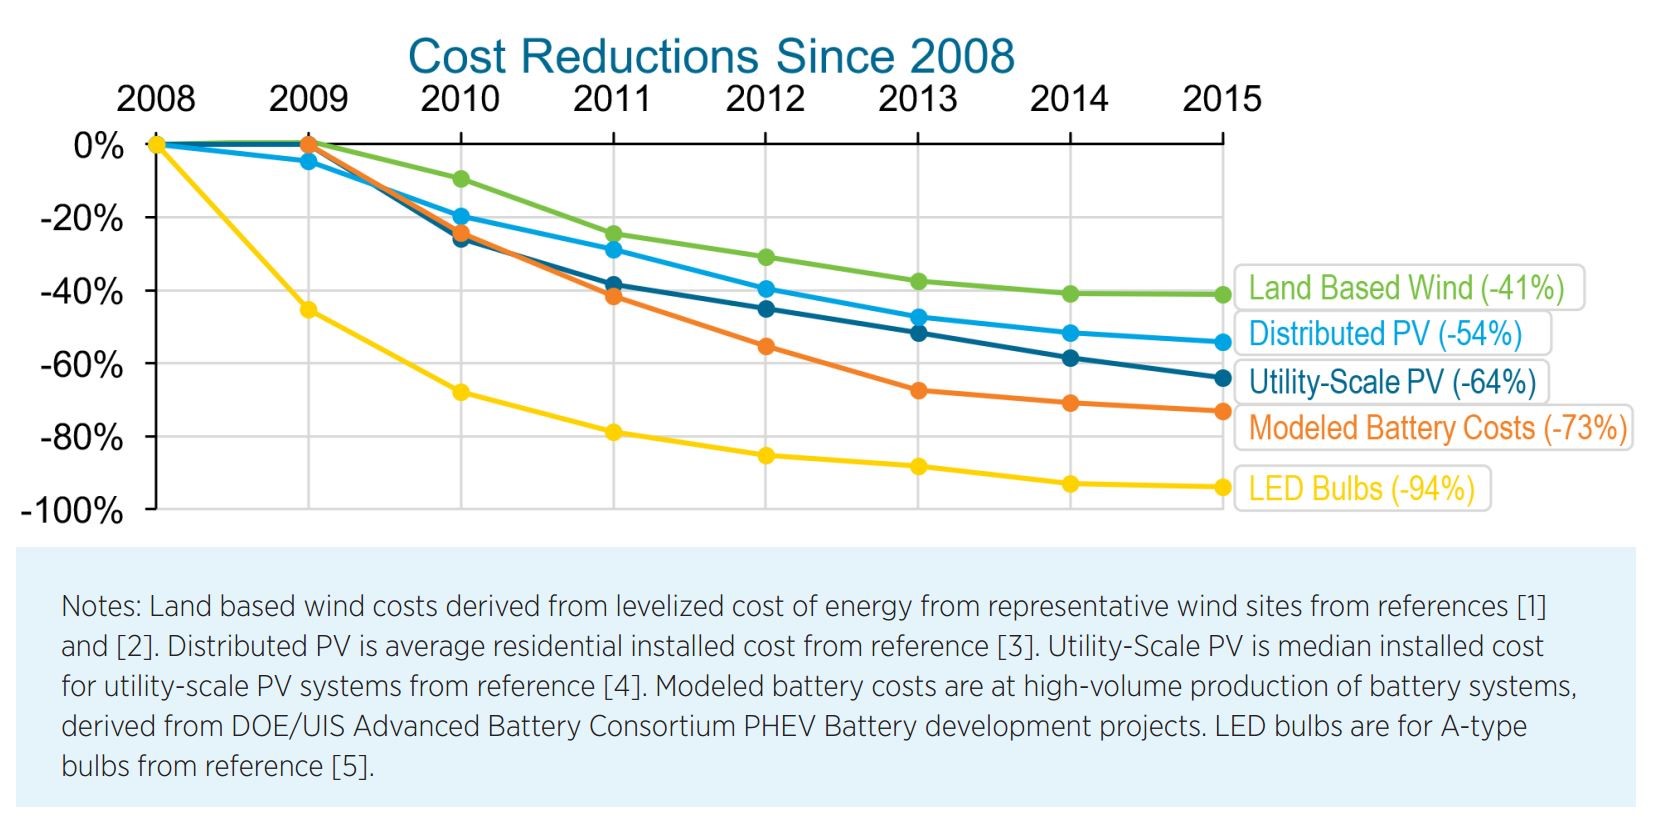 Renewable Cost Reductions